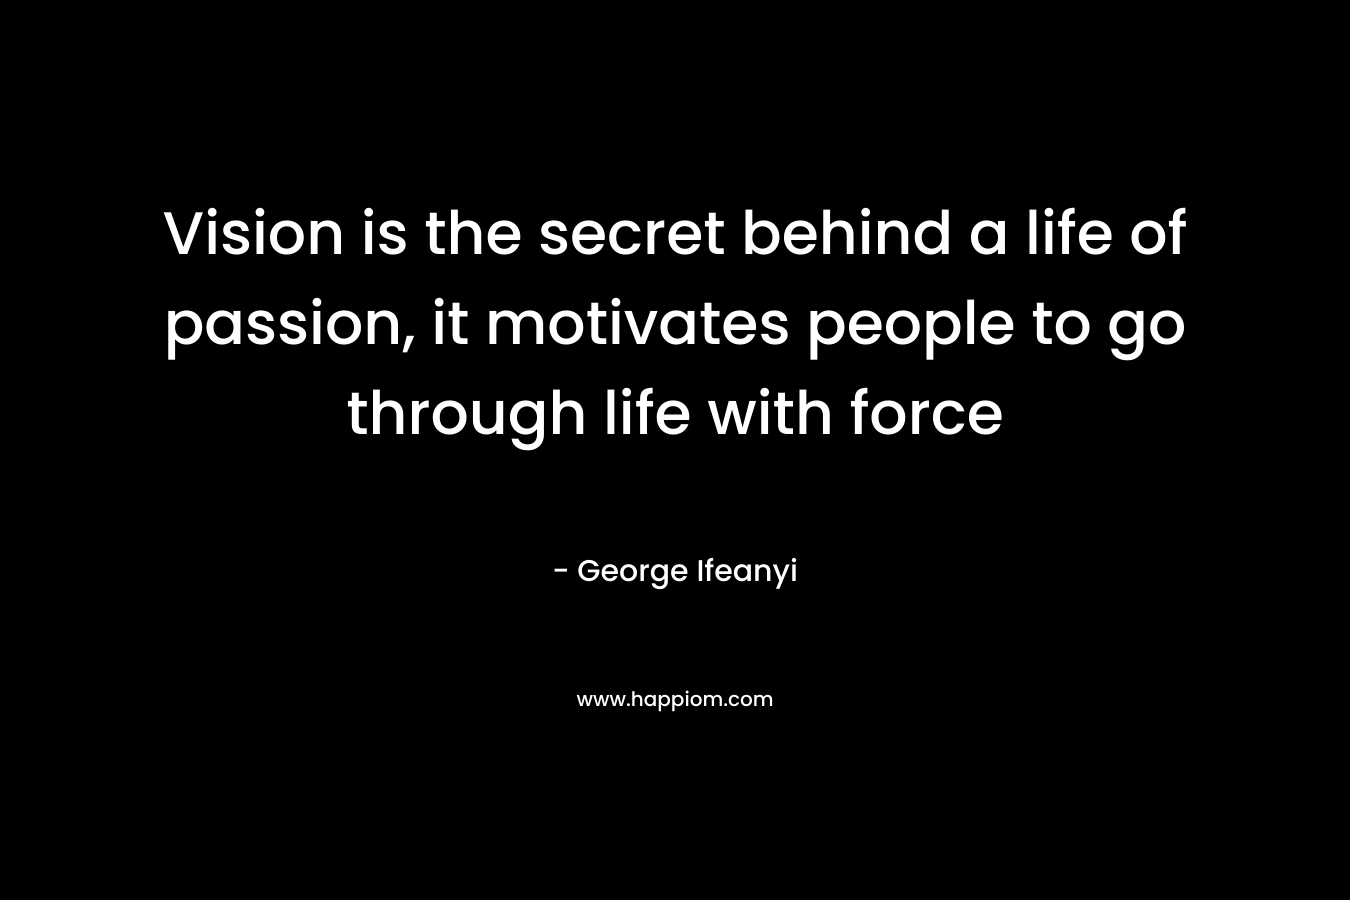 Vision is the secret behind a life of passion, it motivates people to go through life with force – George Ifeanyi